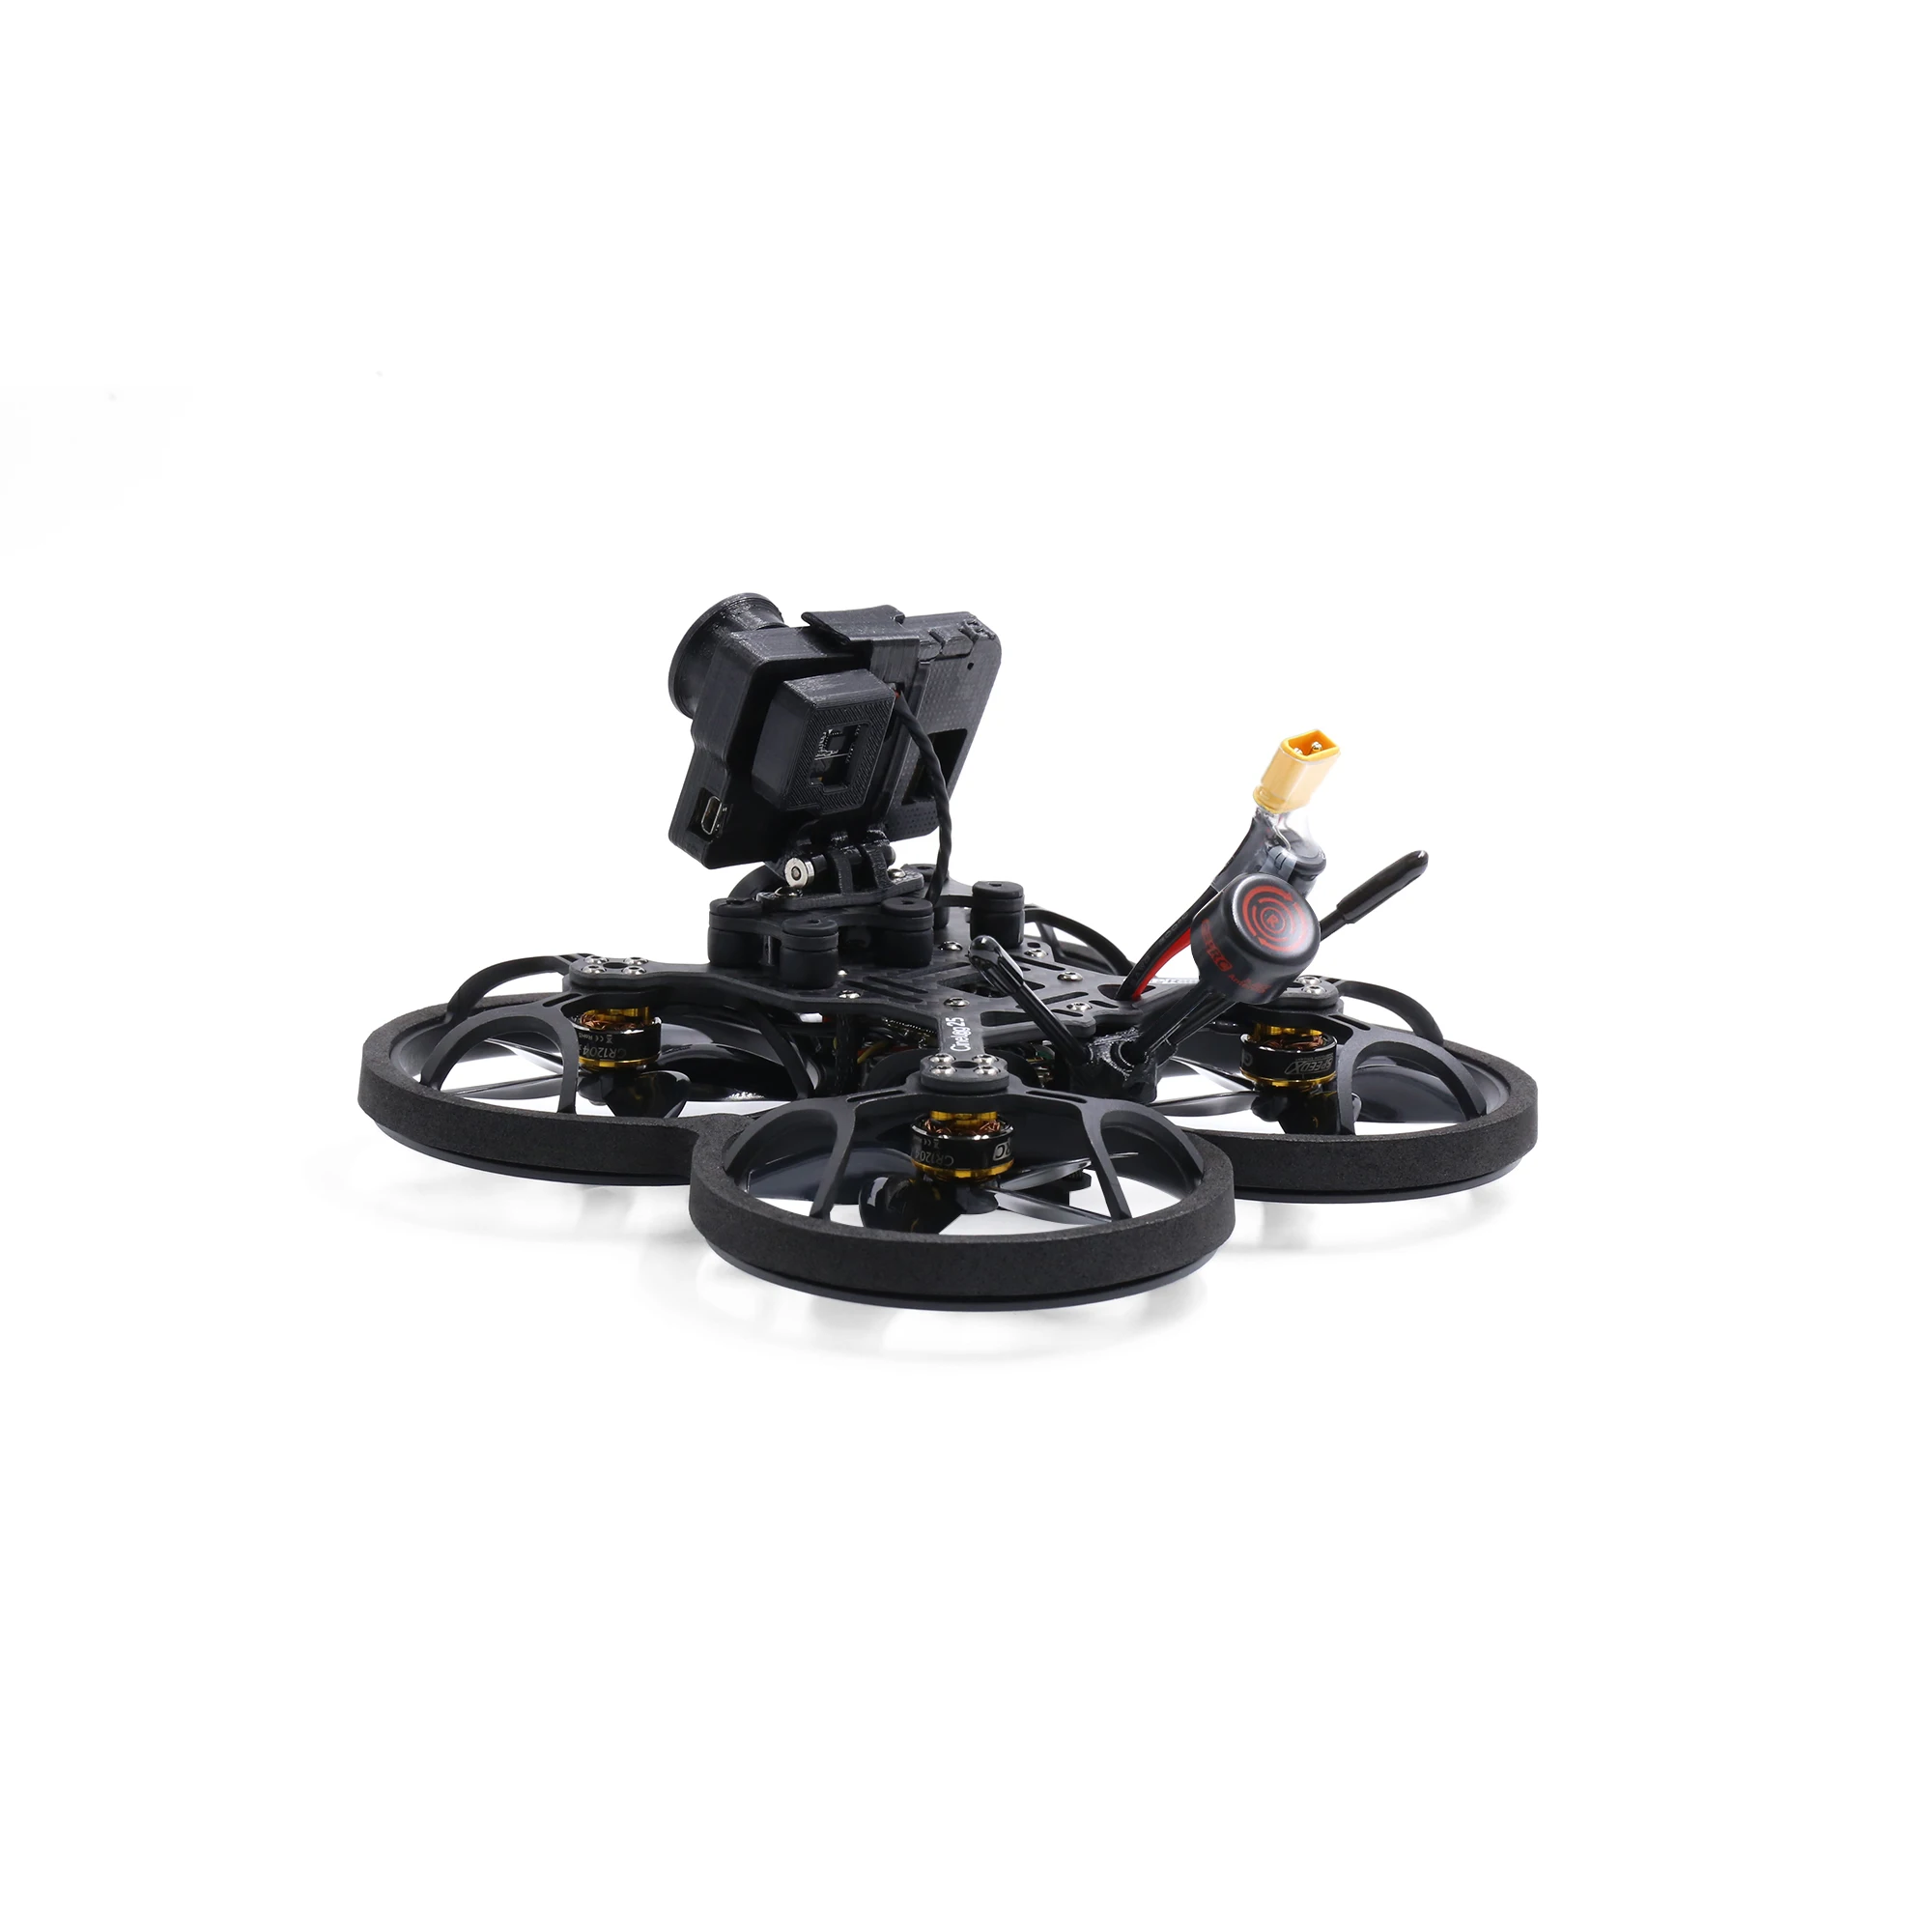 GEPRC CineLog 25 Analog GEP-20A-F4 600mW Caddx EOS2 GR1204 3750KV 4S 109mm 2.5inch FPV Cinewhoop Ducted Drone images - 6